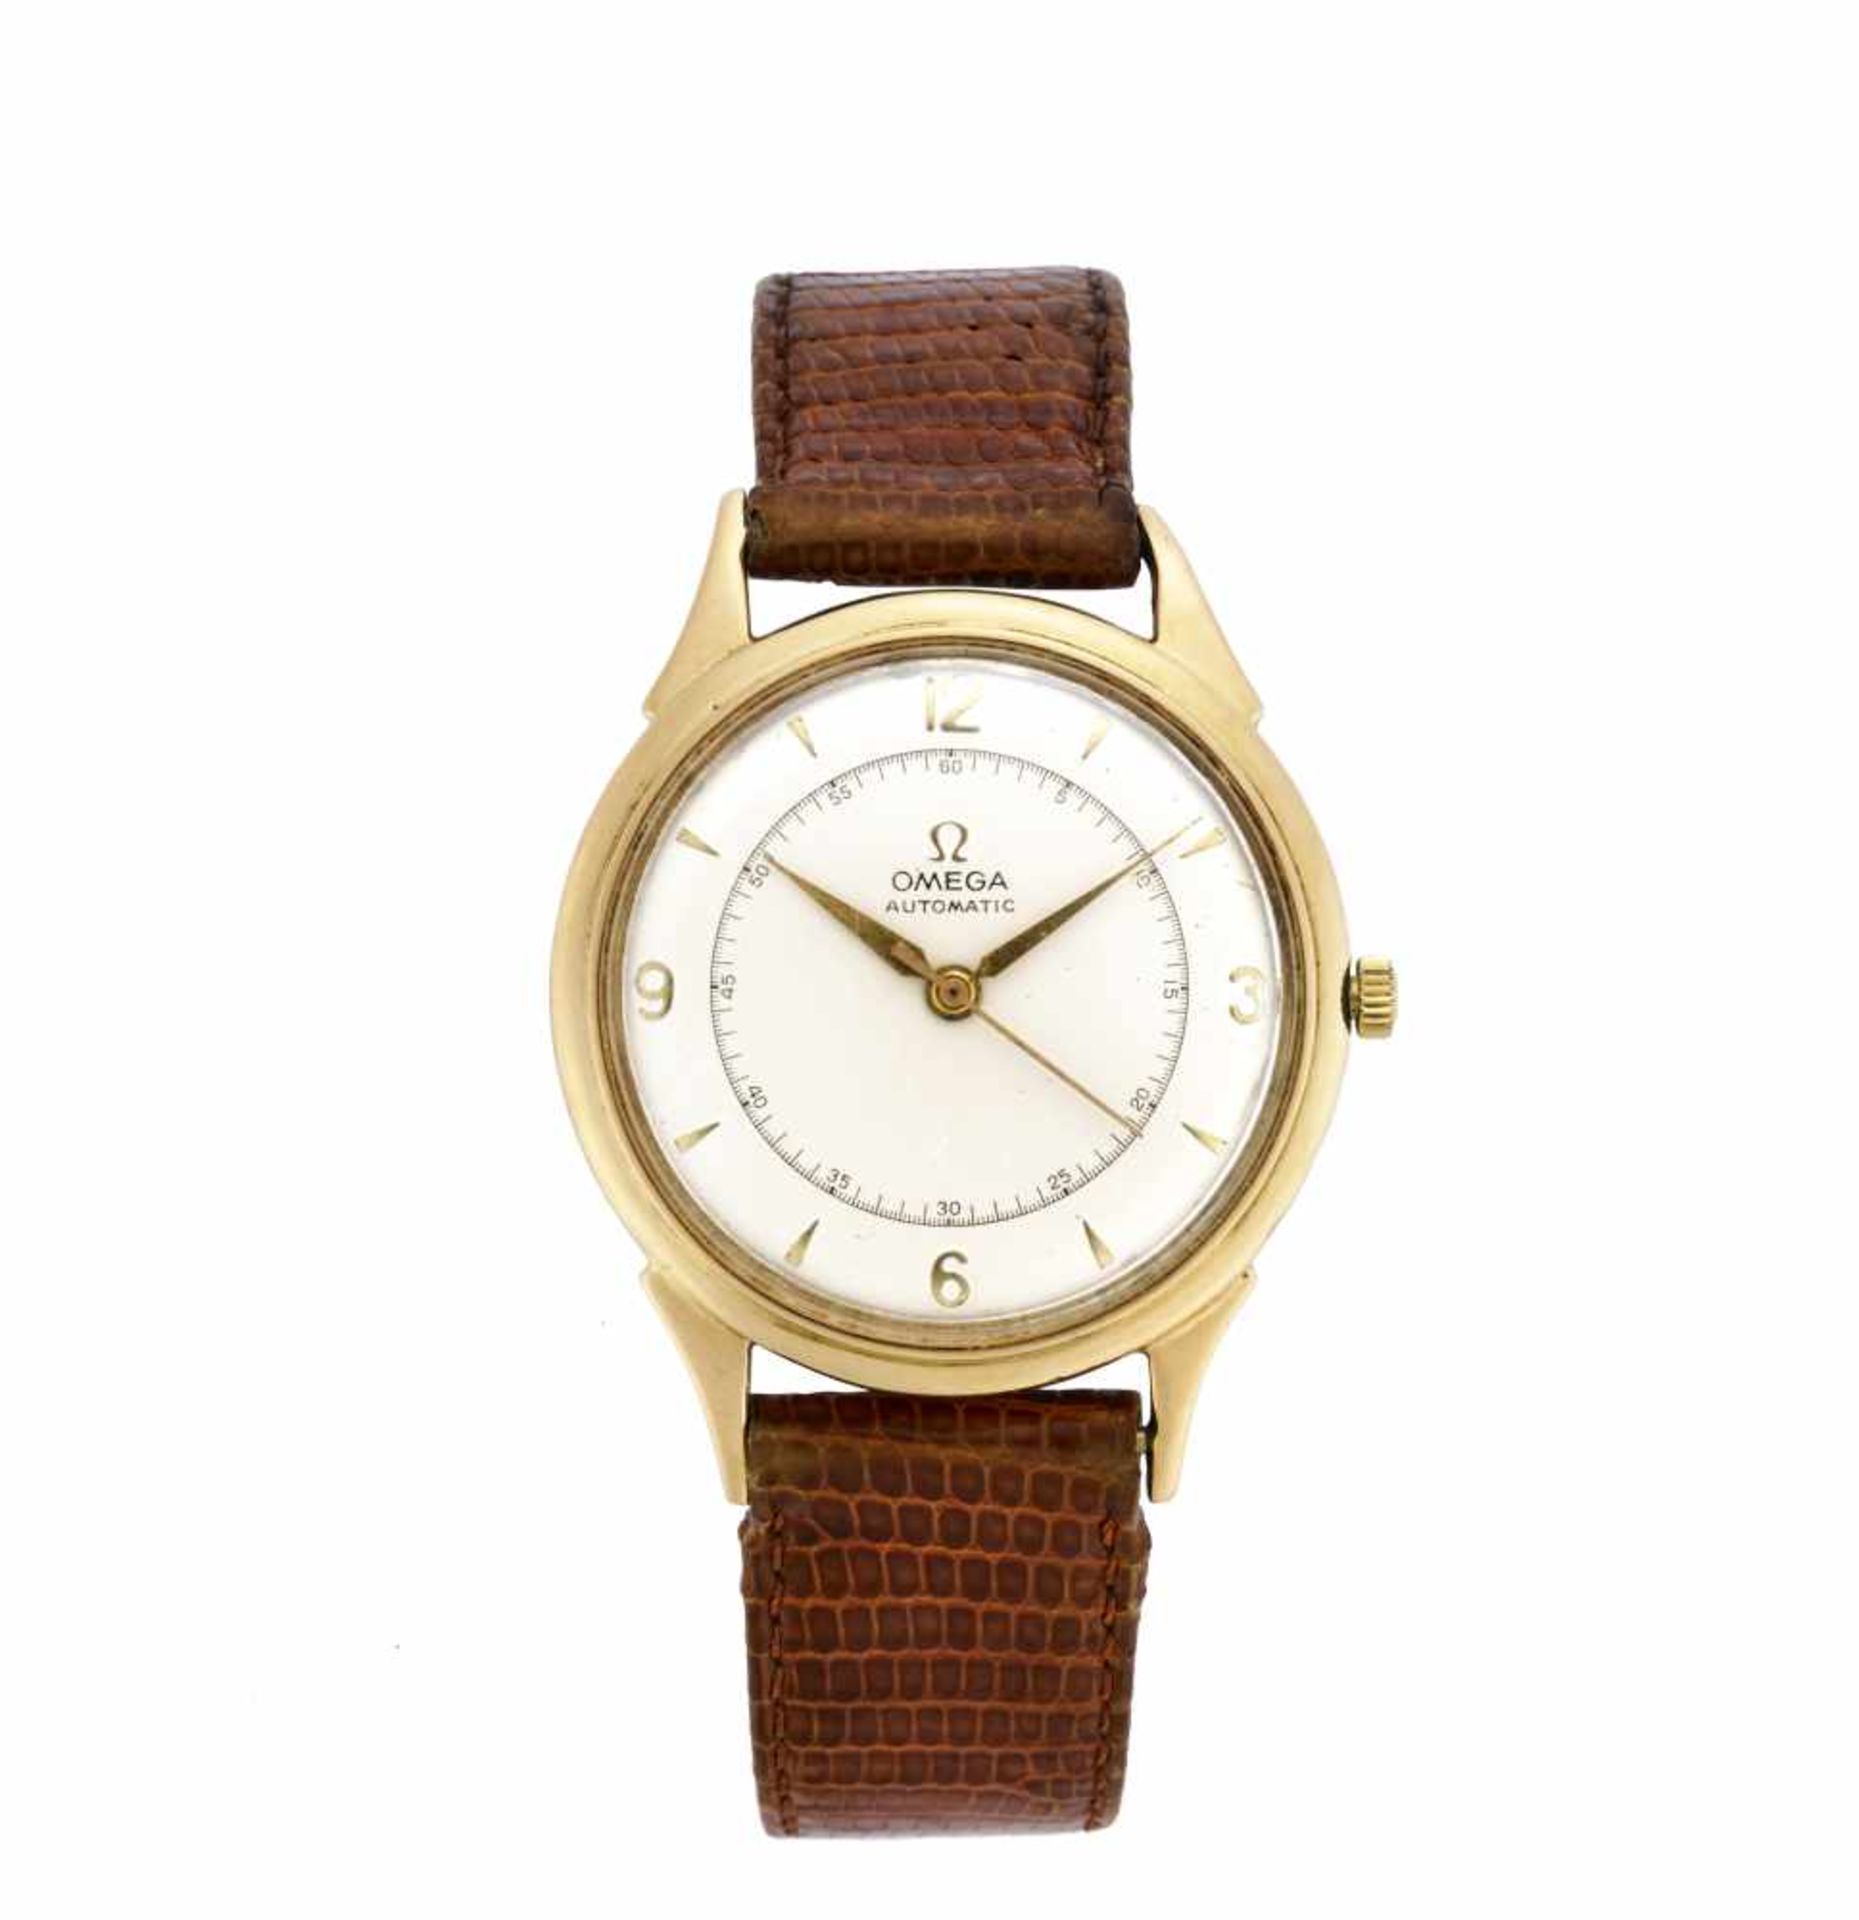 OMEGAGent's 18K gold wristwatch1950s/1960sMovement signedAutomatic movementSilvered dial with